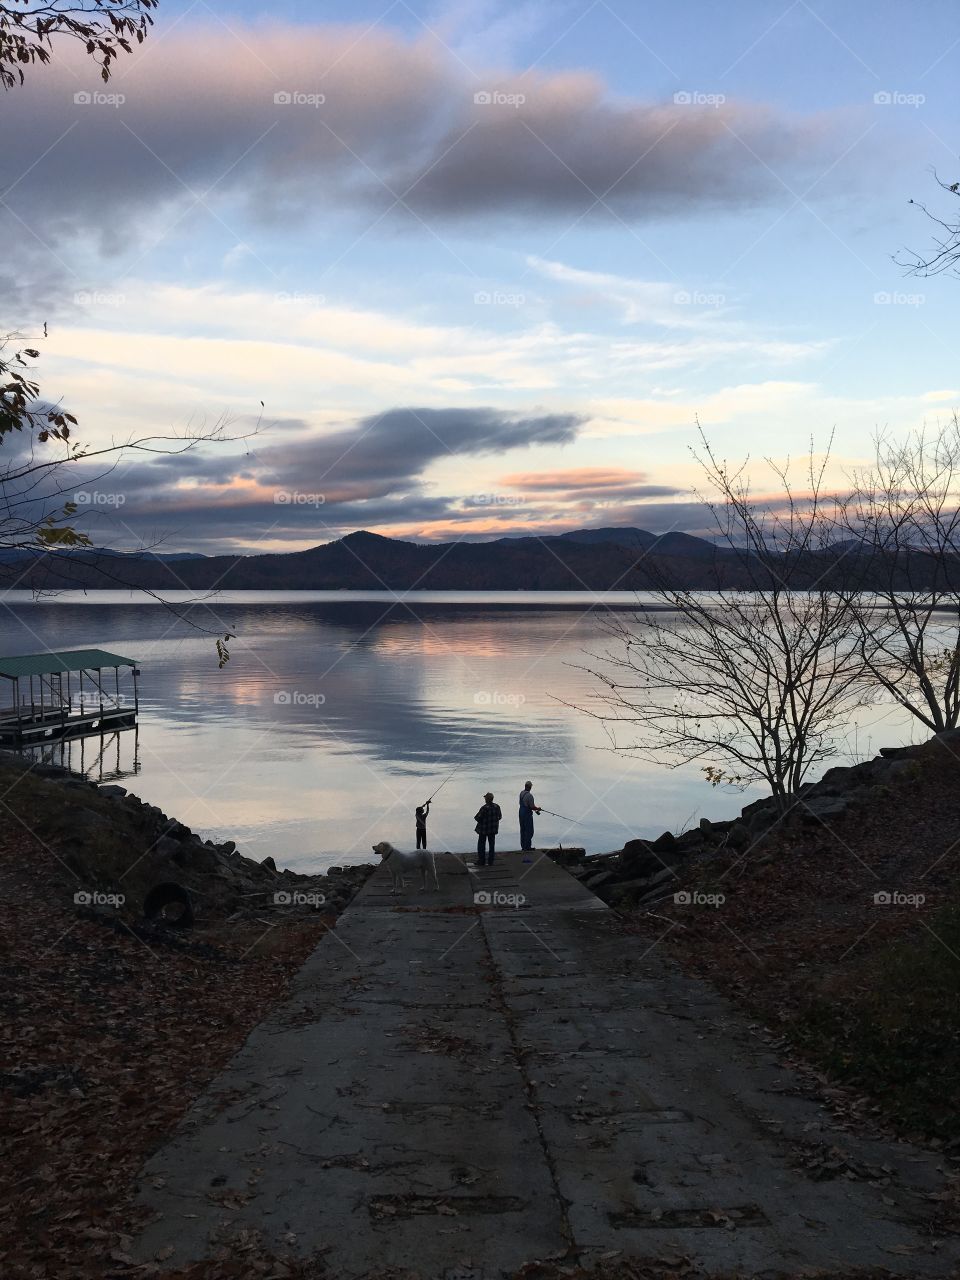 My husband, his father, and one of our sons decided to go fishing tonight. I followed behind after getting lunches ready for tomorrow. The sunset was amazing over Lake Jocassee! This picture tells the story of our family. We love spending time together! 